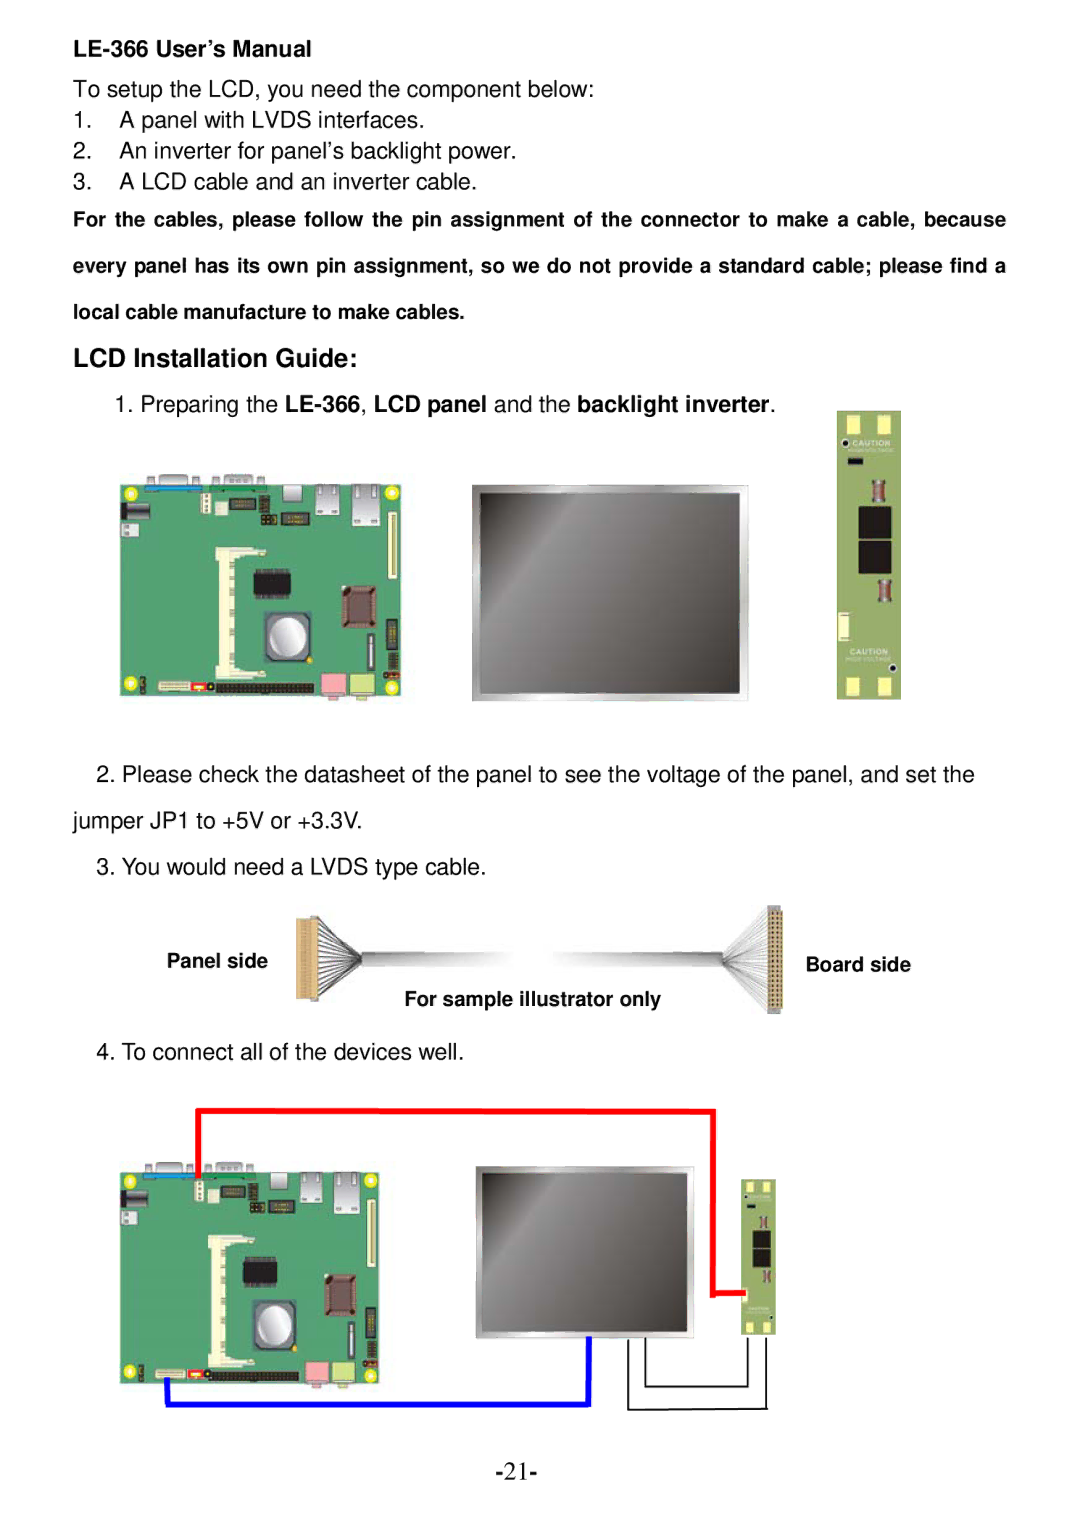 AMD user manual LCD Installation Guide, Preparing the LE-366,LCD panel and the backlight inverter 